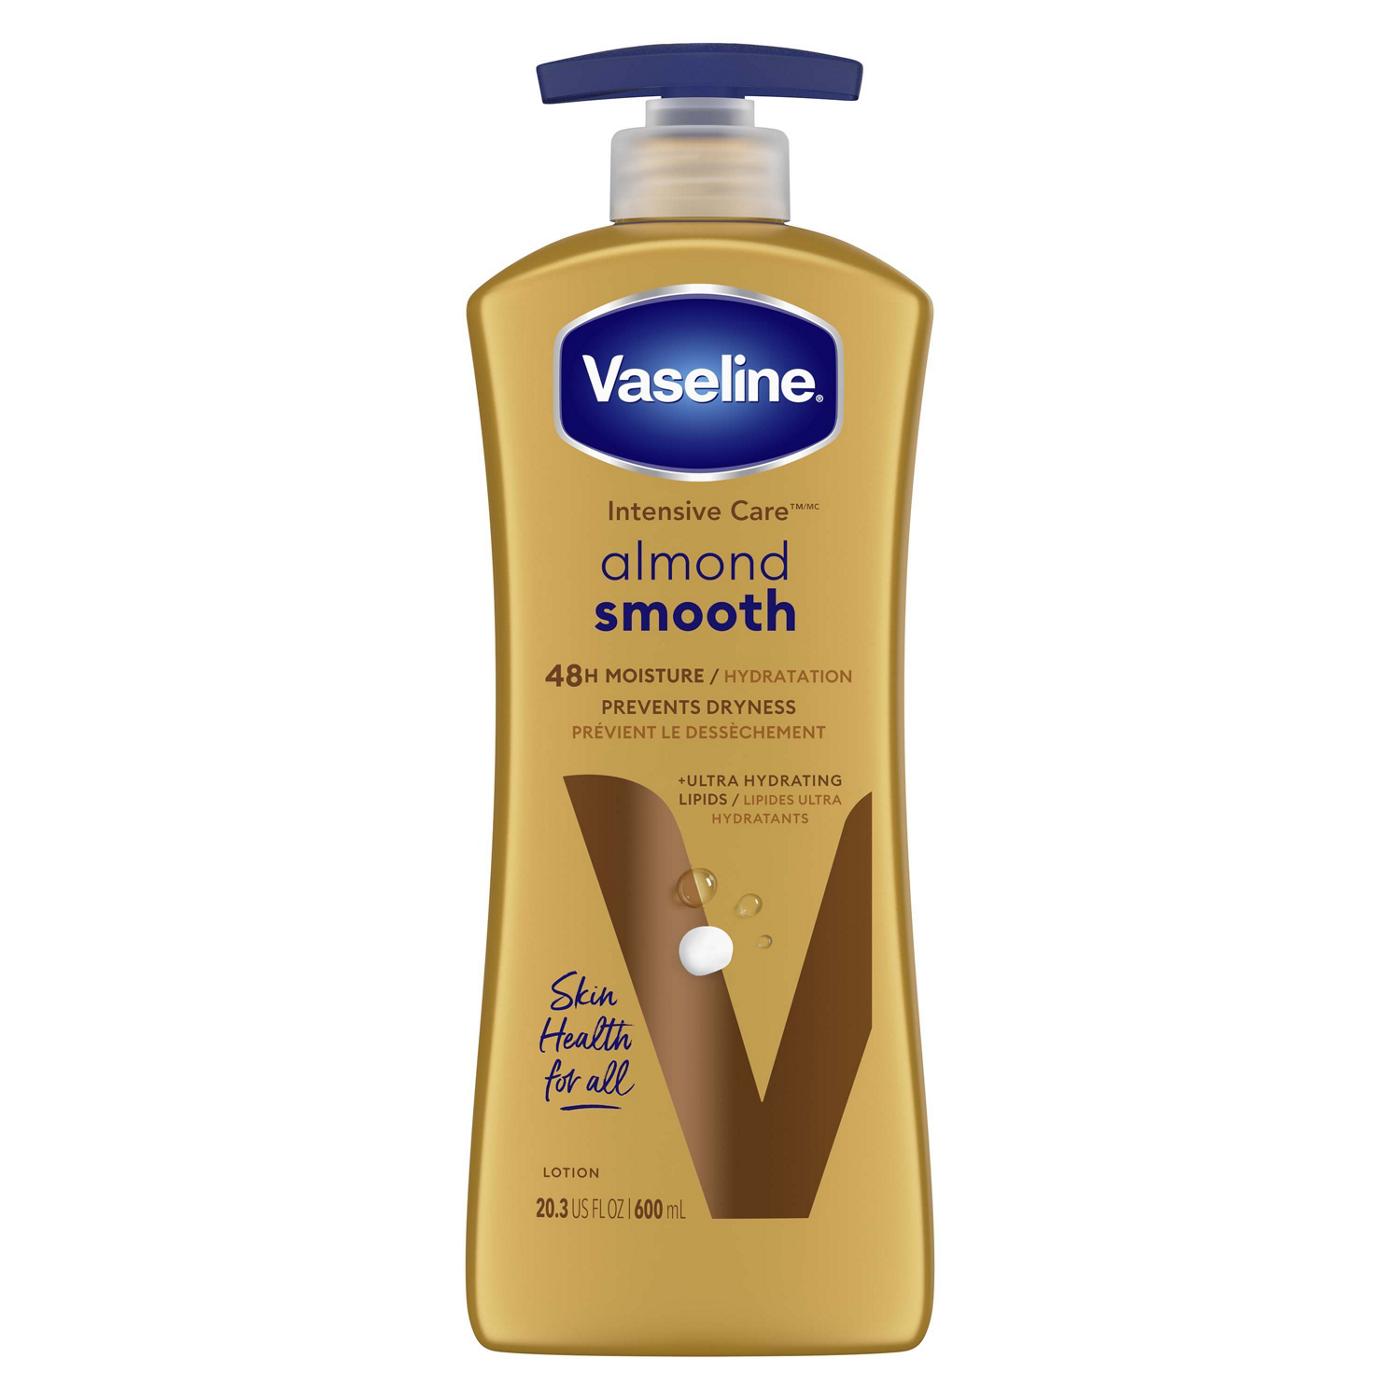 Vaseline Intensive Care Almond Smooth Lotion; image 1 of 8